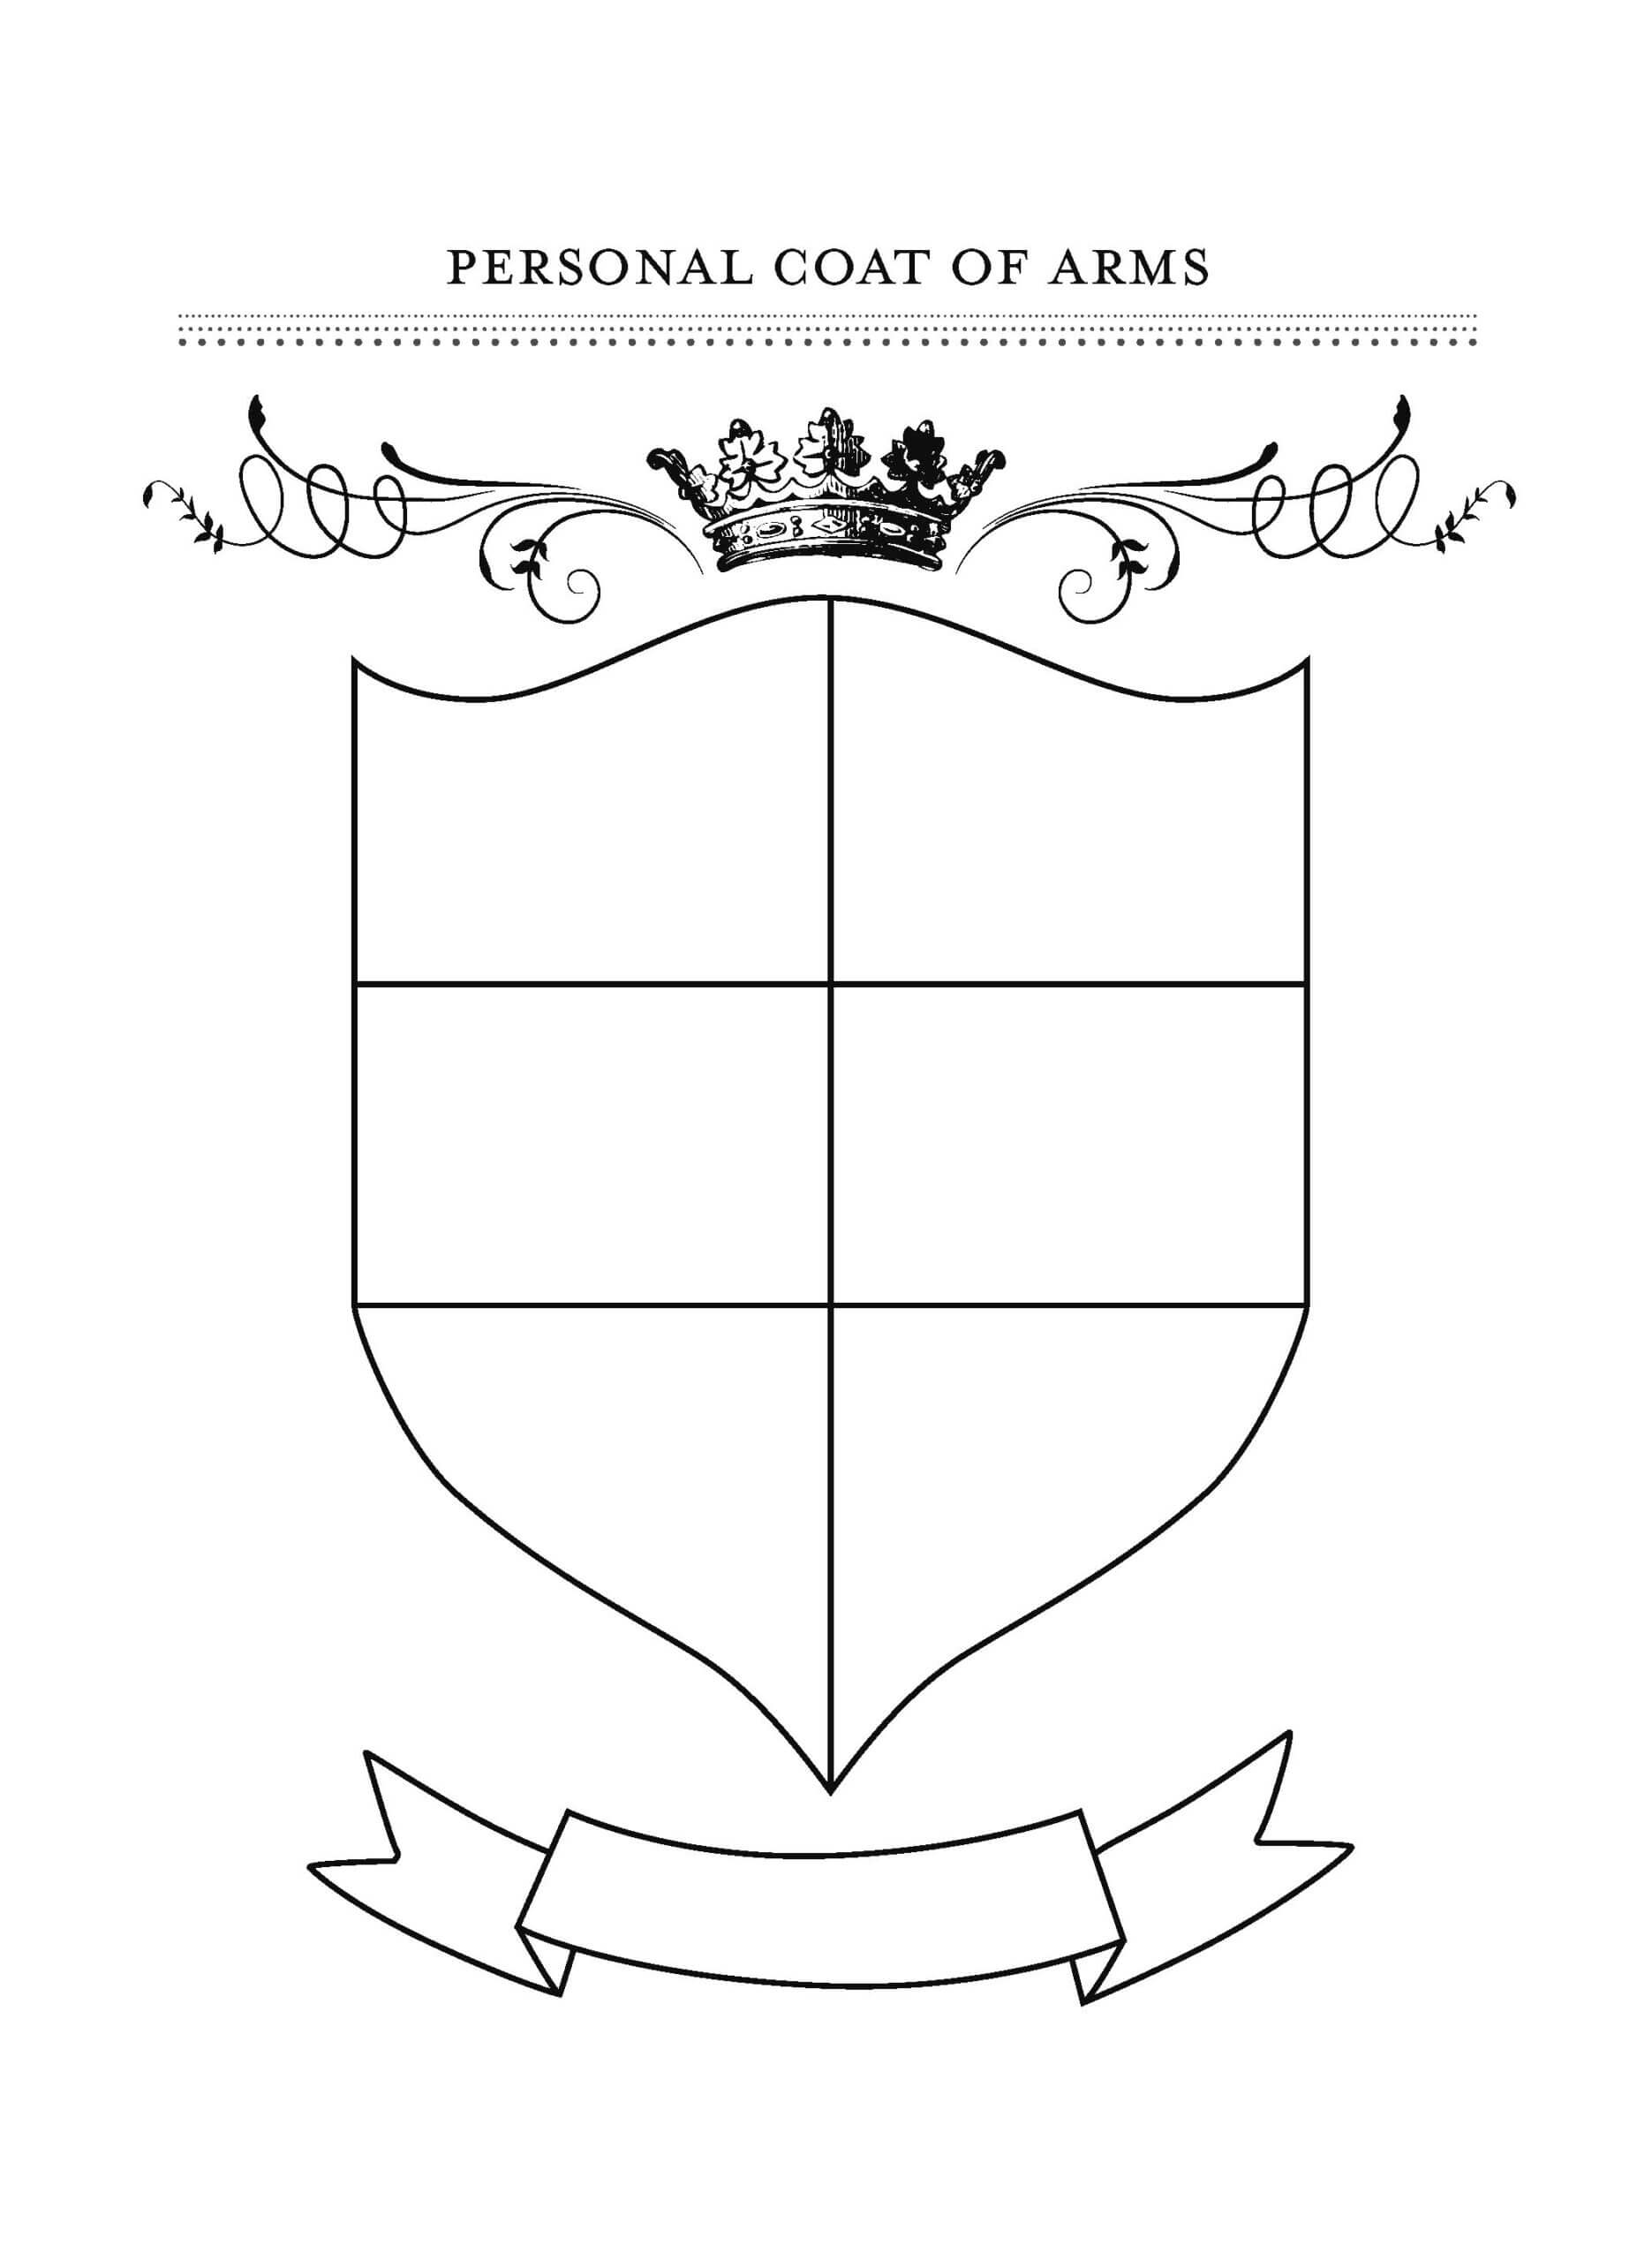 Blank Coat Of Arms Template Png Images Collection For Free Throughout Blank Shield Template Printable